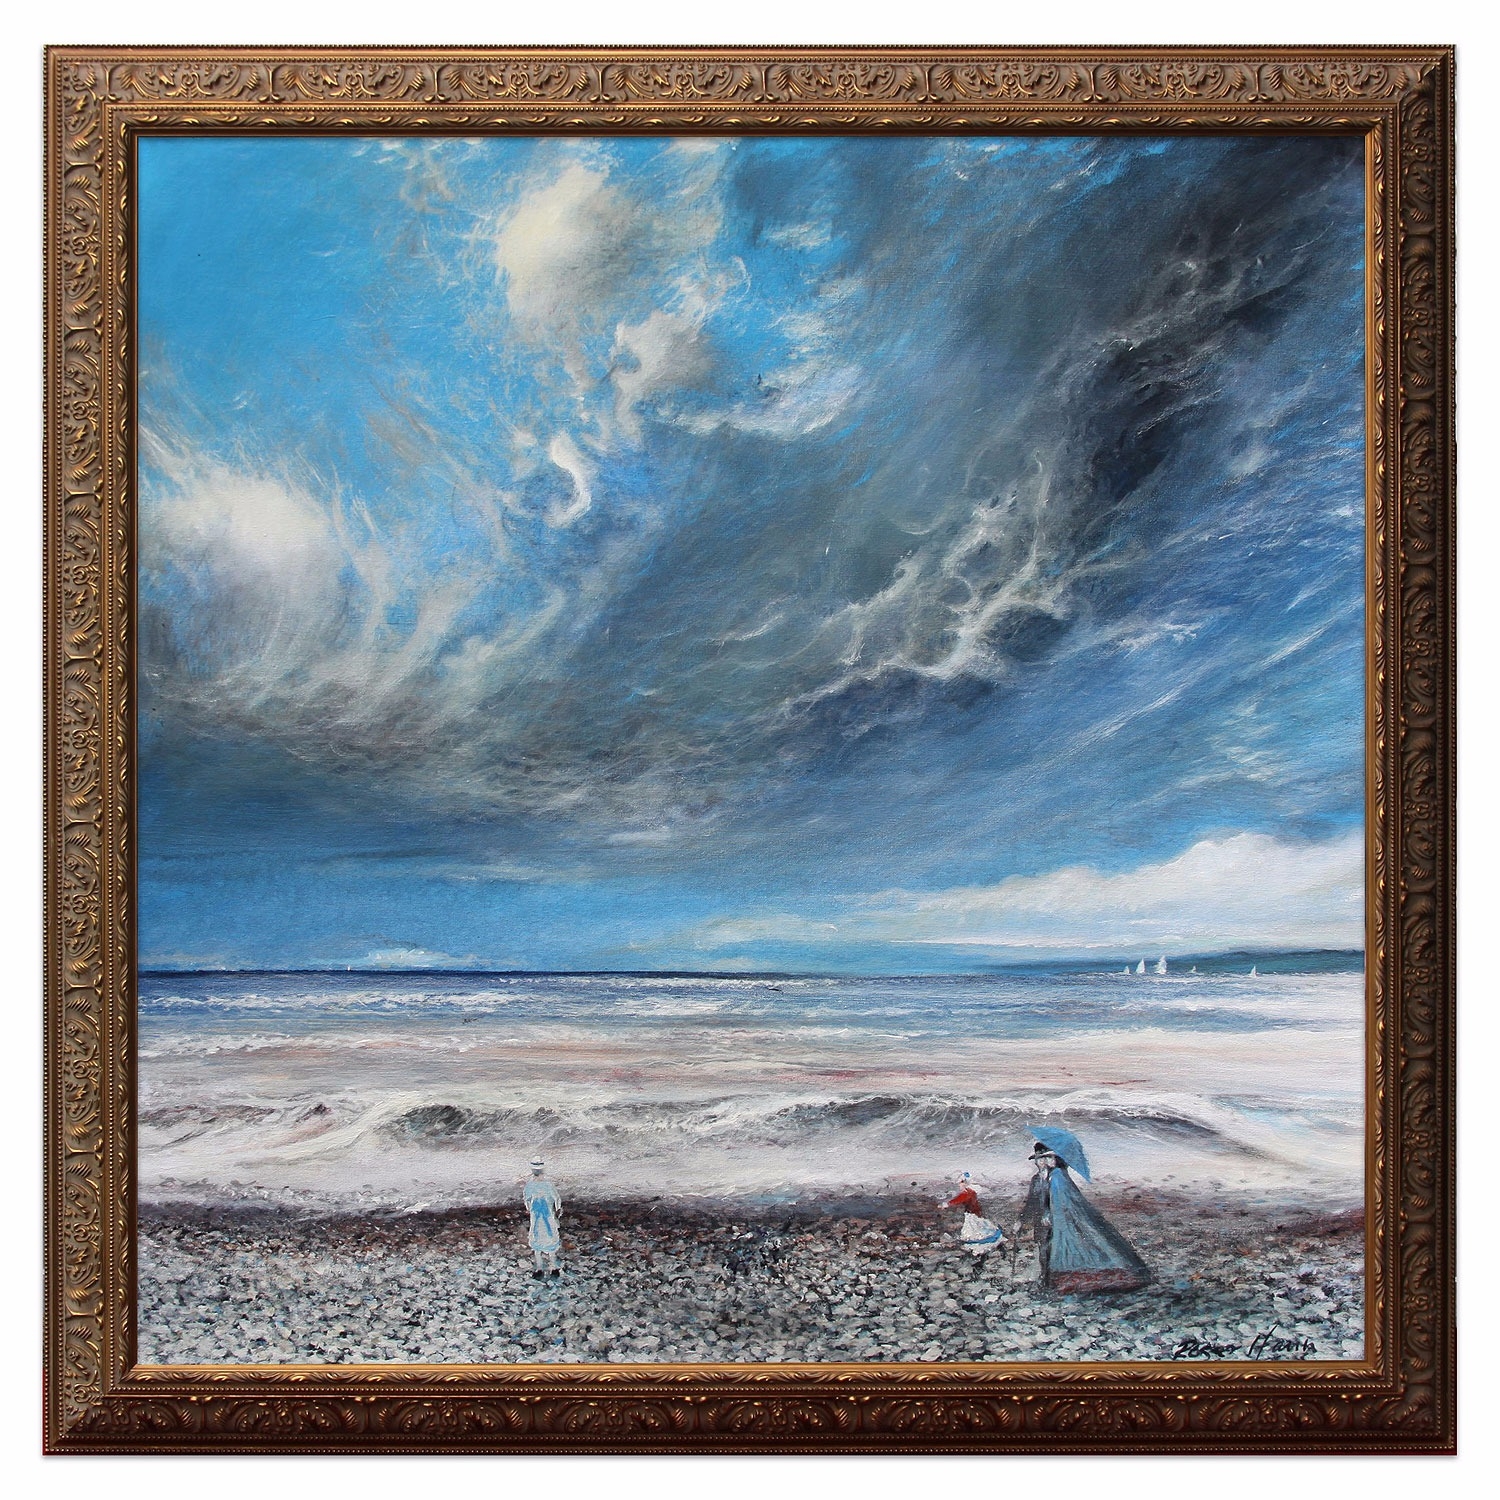 A stroll after lunch to enjoy the crashing waves, original framed oil painting